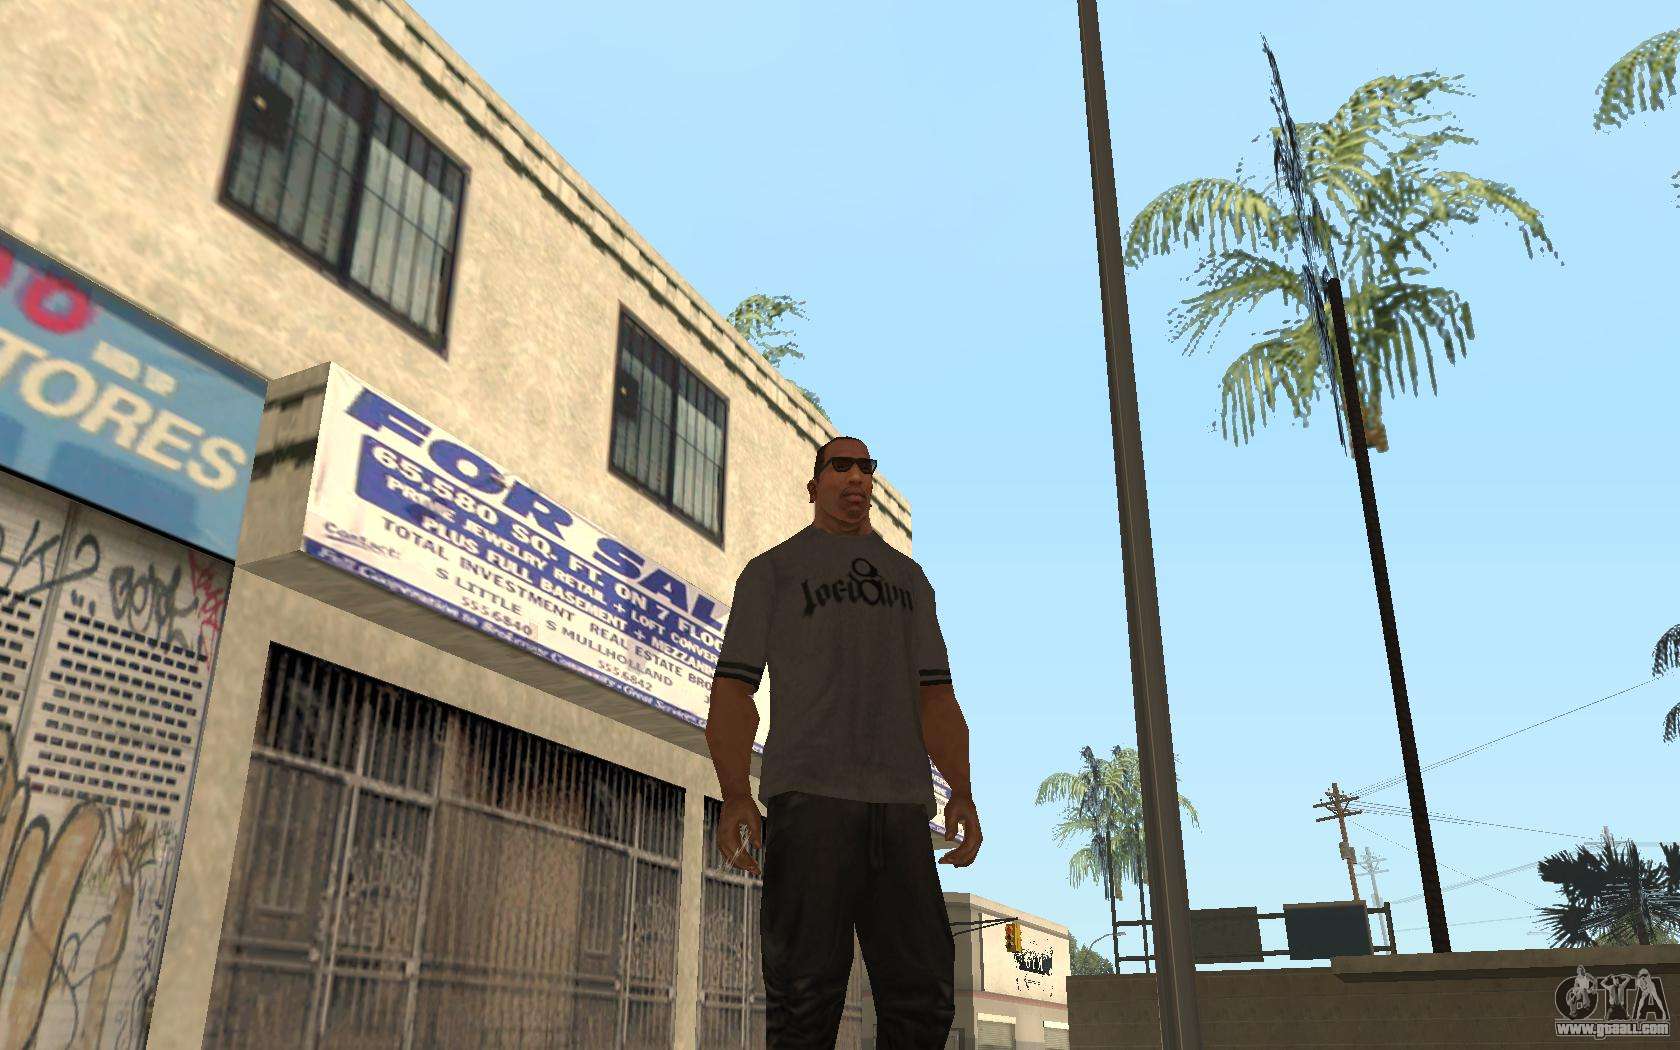 How to Use cheat codes when playing GTA: San Andreas on the Playstation « PlayStation  2 :: WonderHowTo